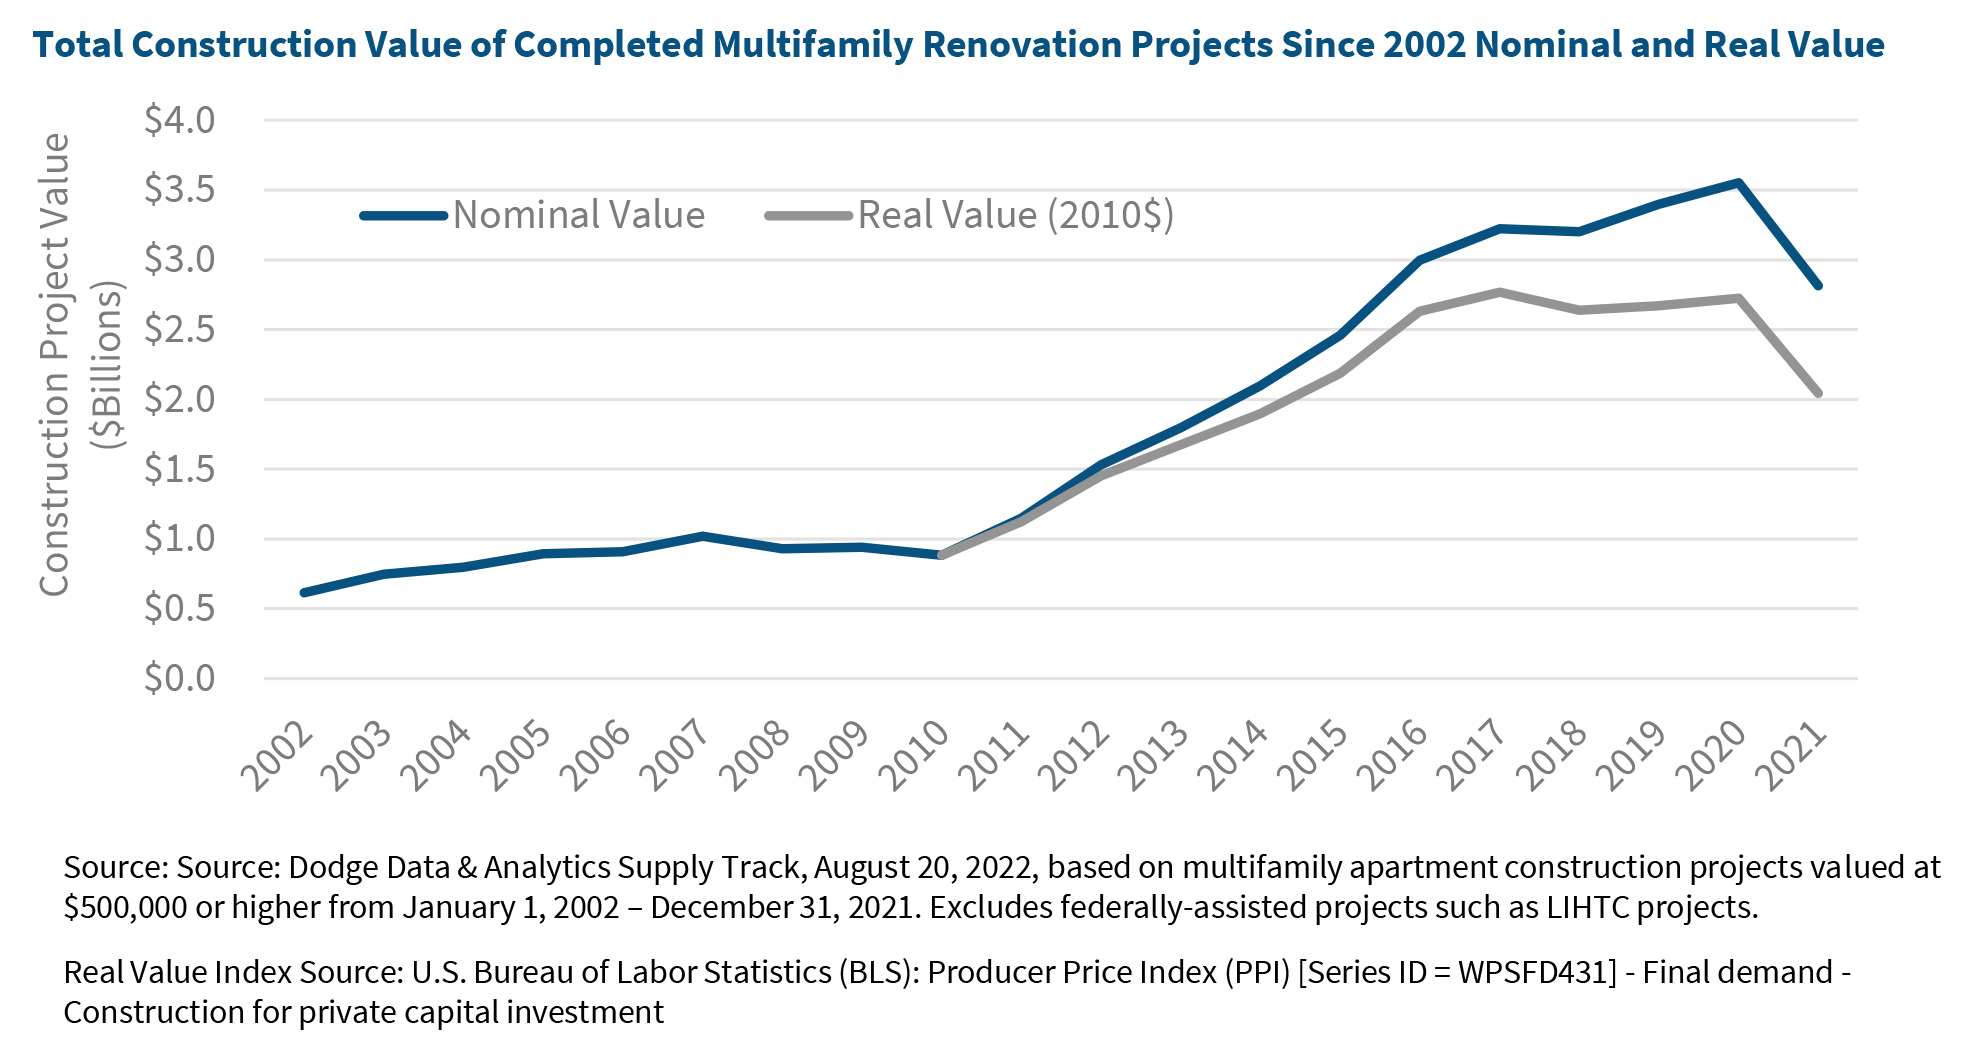 Total Construction Value of Completed Multifamily Renovation Projects Since 2002 Nominal and Real Value